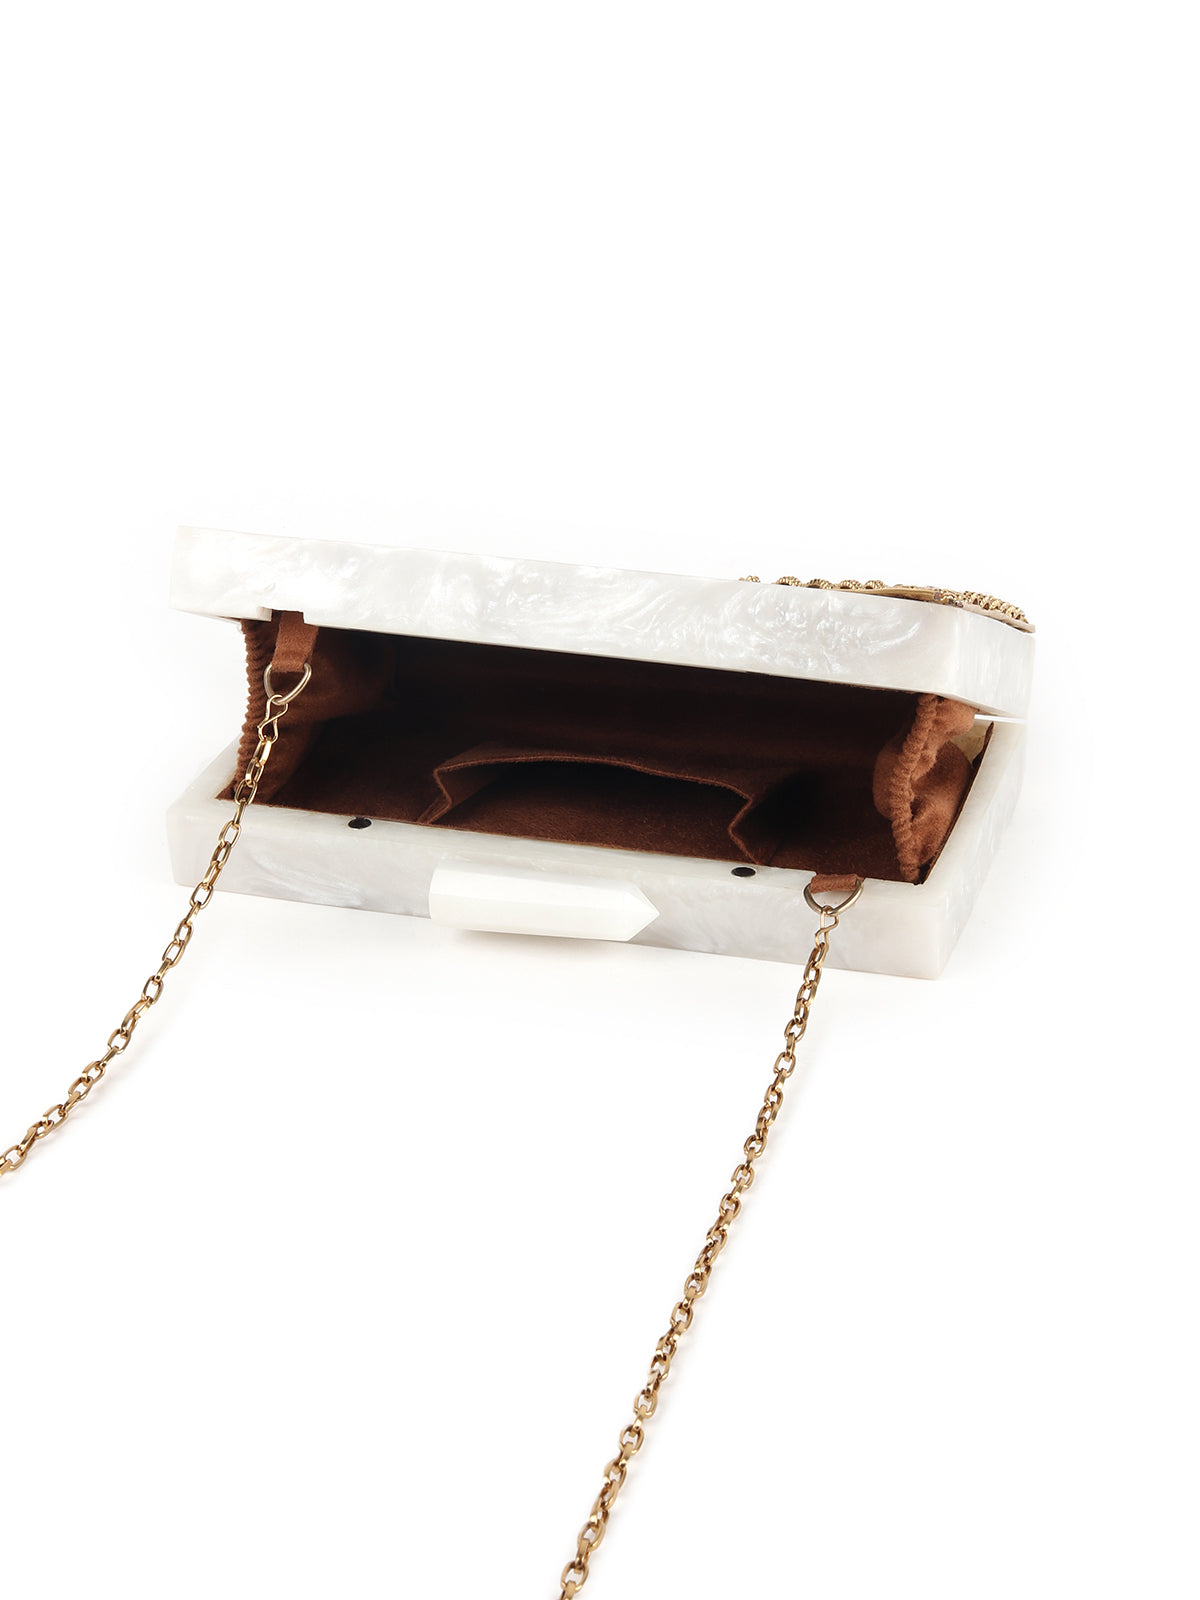 Odette White And Gold Resin Box Clutch Bag For Women